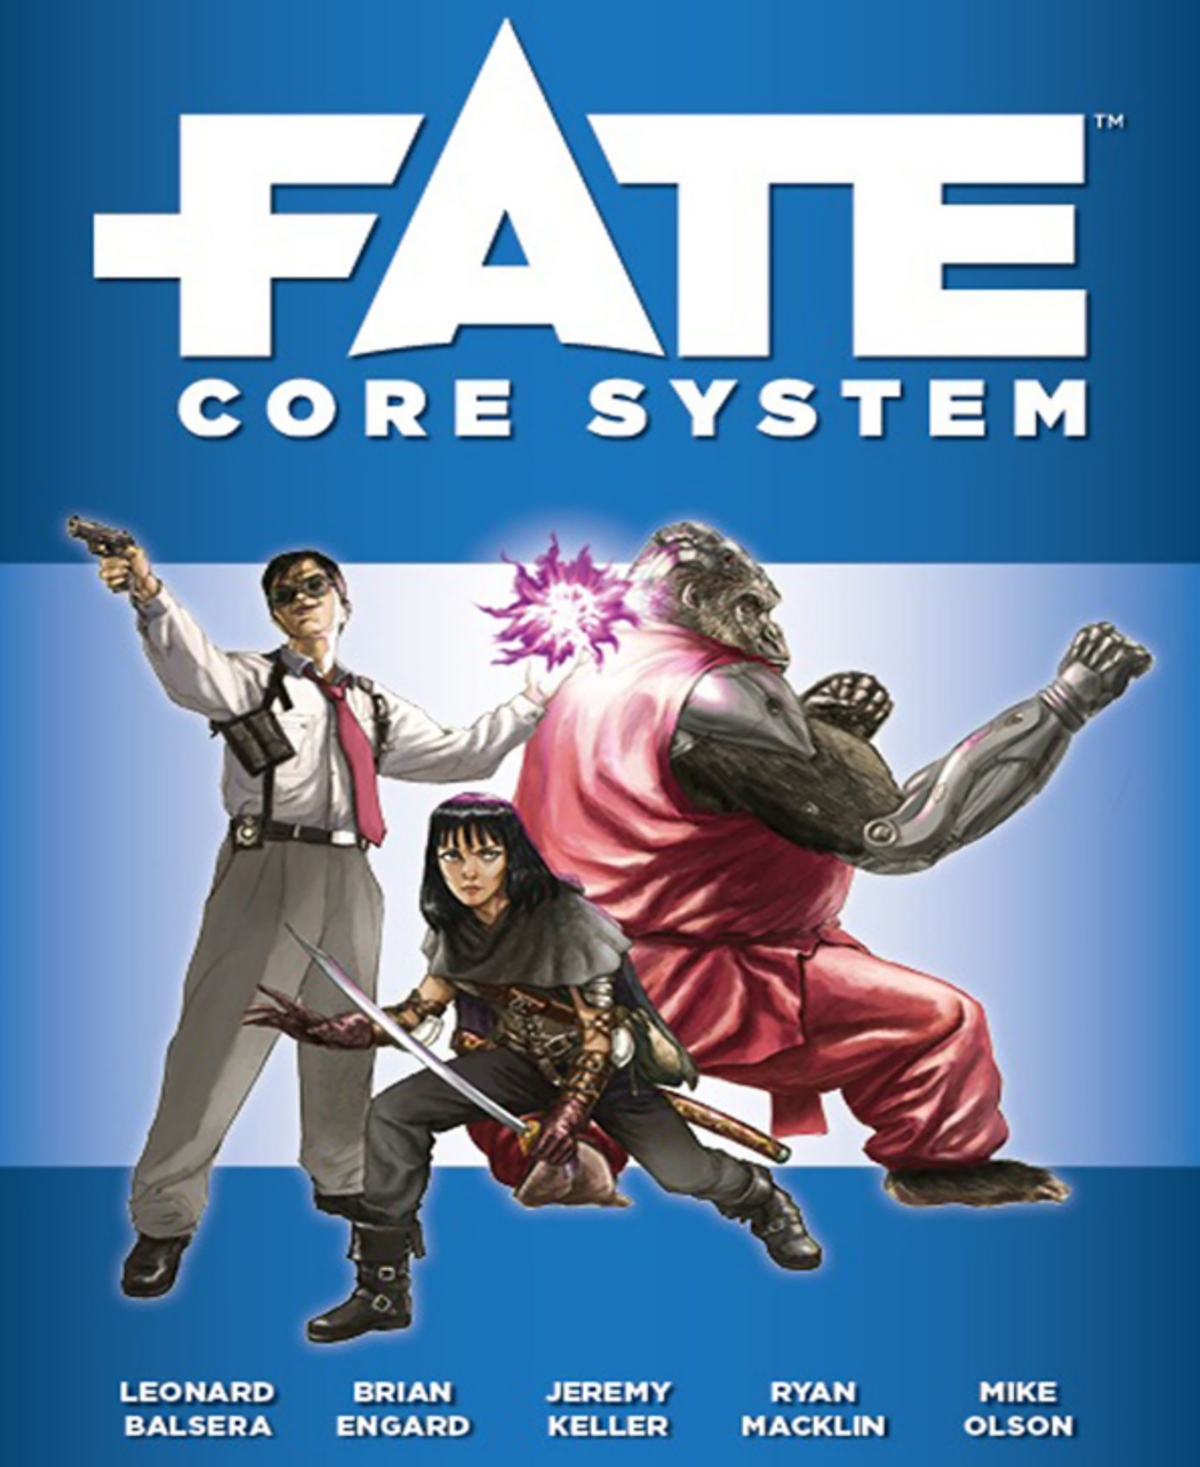 ISBN 9781613170298 product image for Fate Core System Roleplaying Game | upcitemdb.com